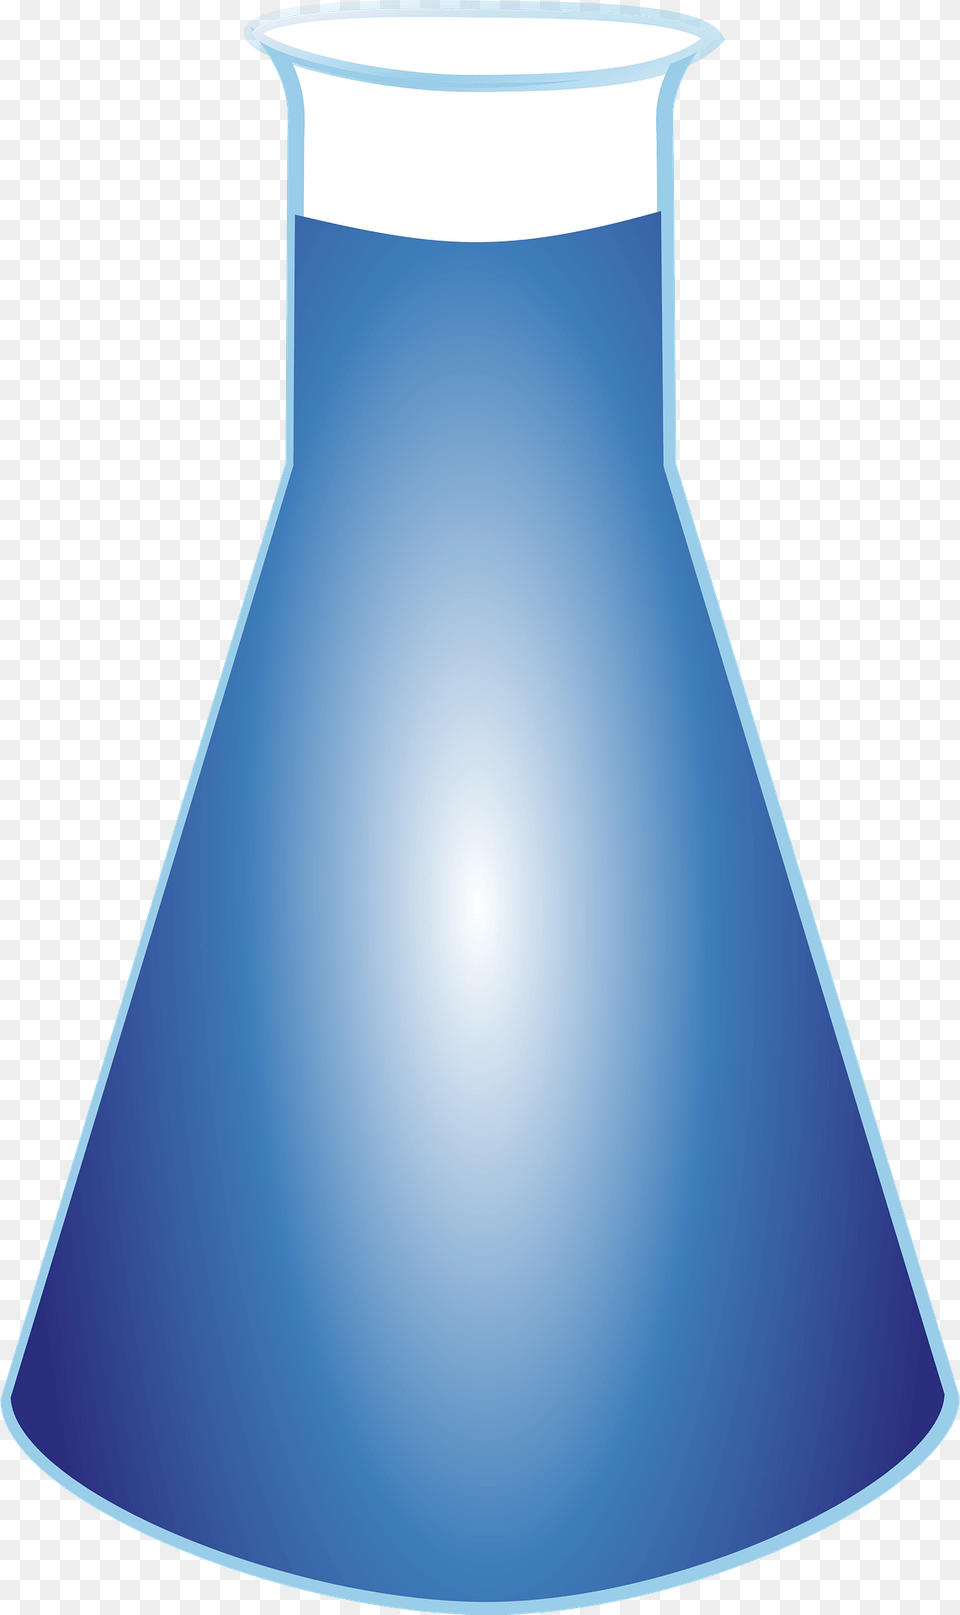 Flask Filled With Blue Liquid Clipart, Cone, Jar, Lamp, Lampshade Free Transparent Png